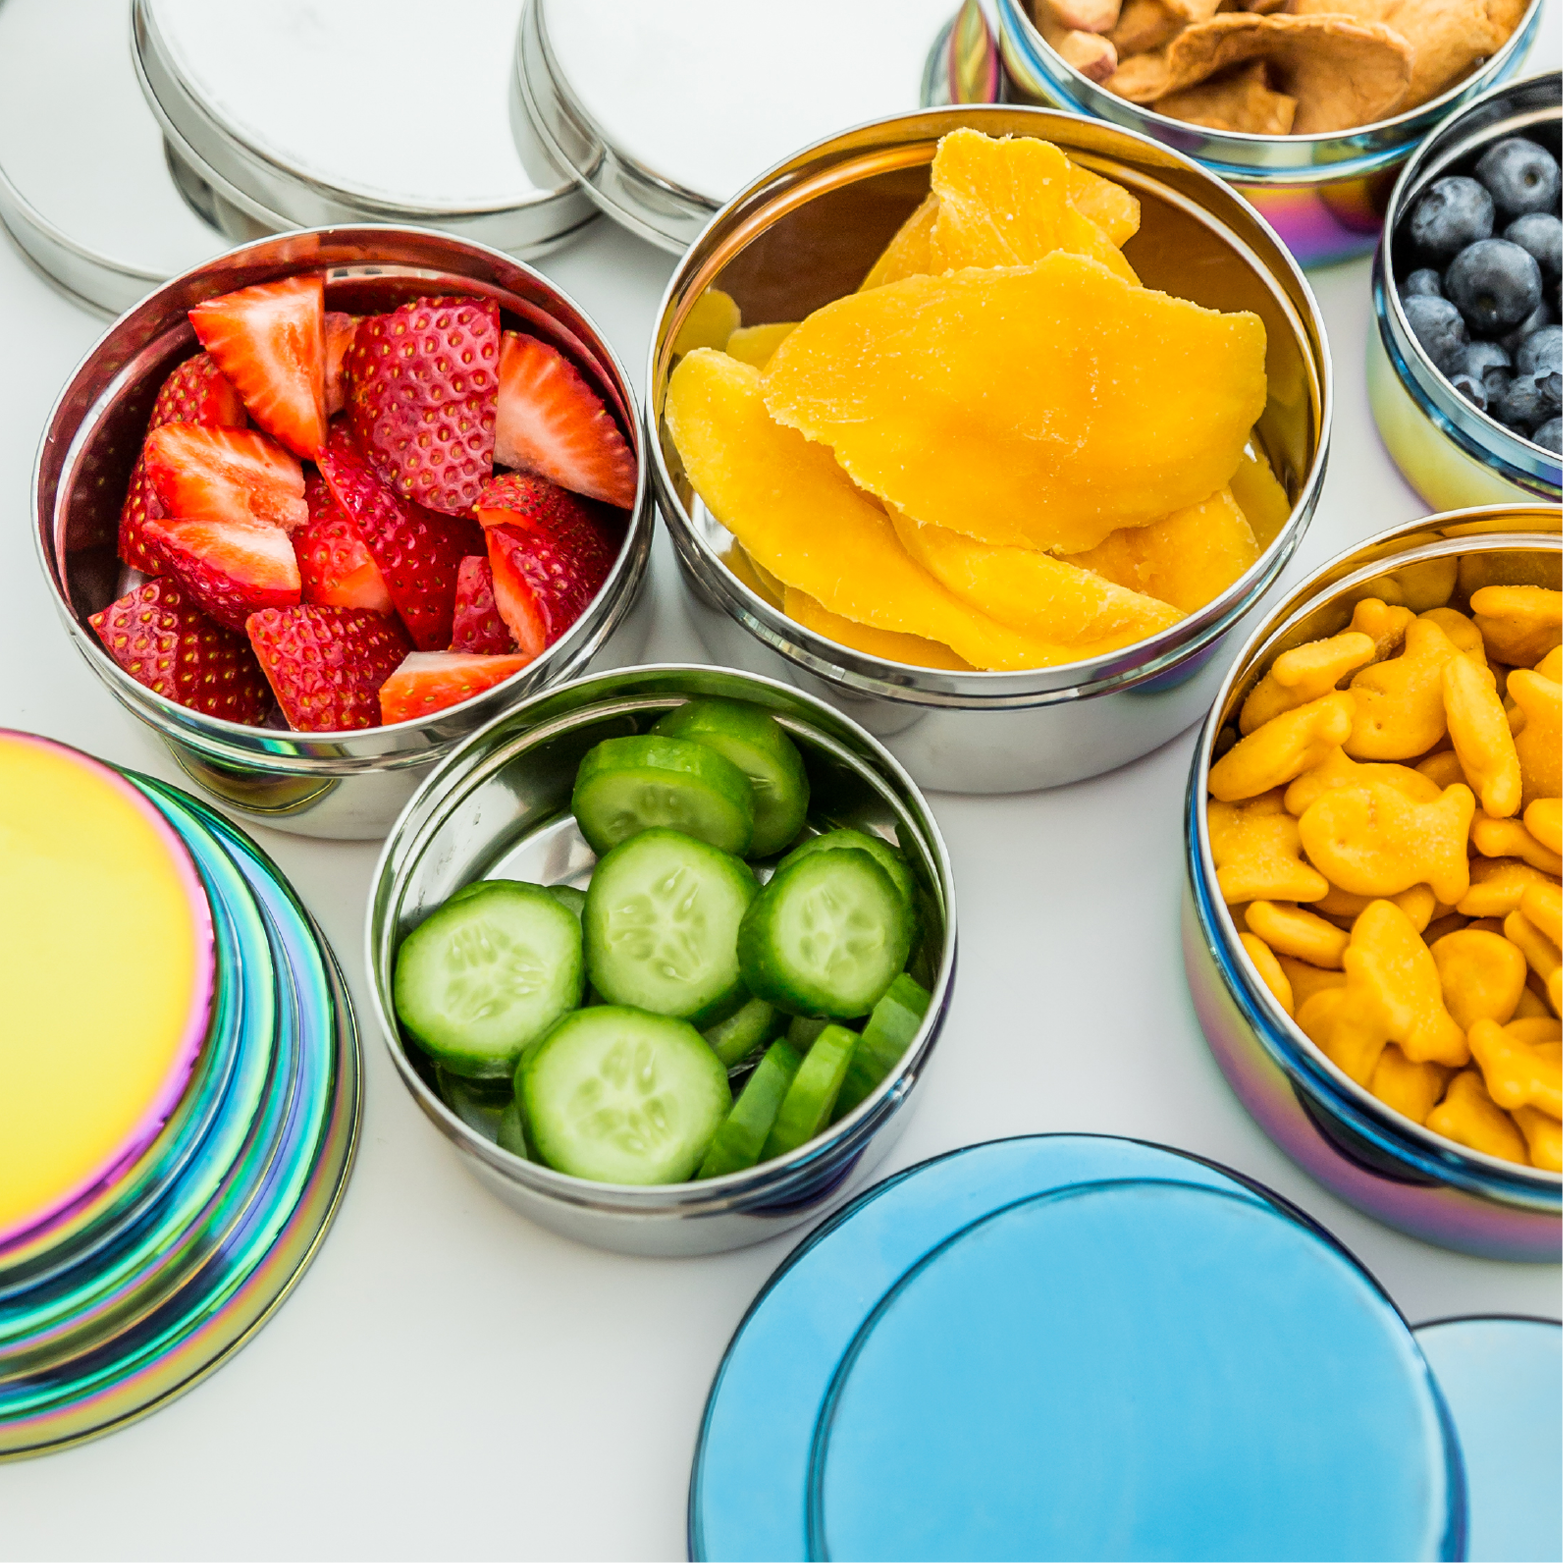 The perfect containers with lids for snacks, lunches, poolside, picnics, sporting events and any on the go occassion.  Pictured in Classic, Rainbow and Iridescent Blue.